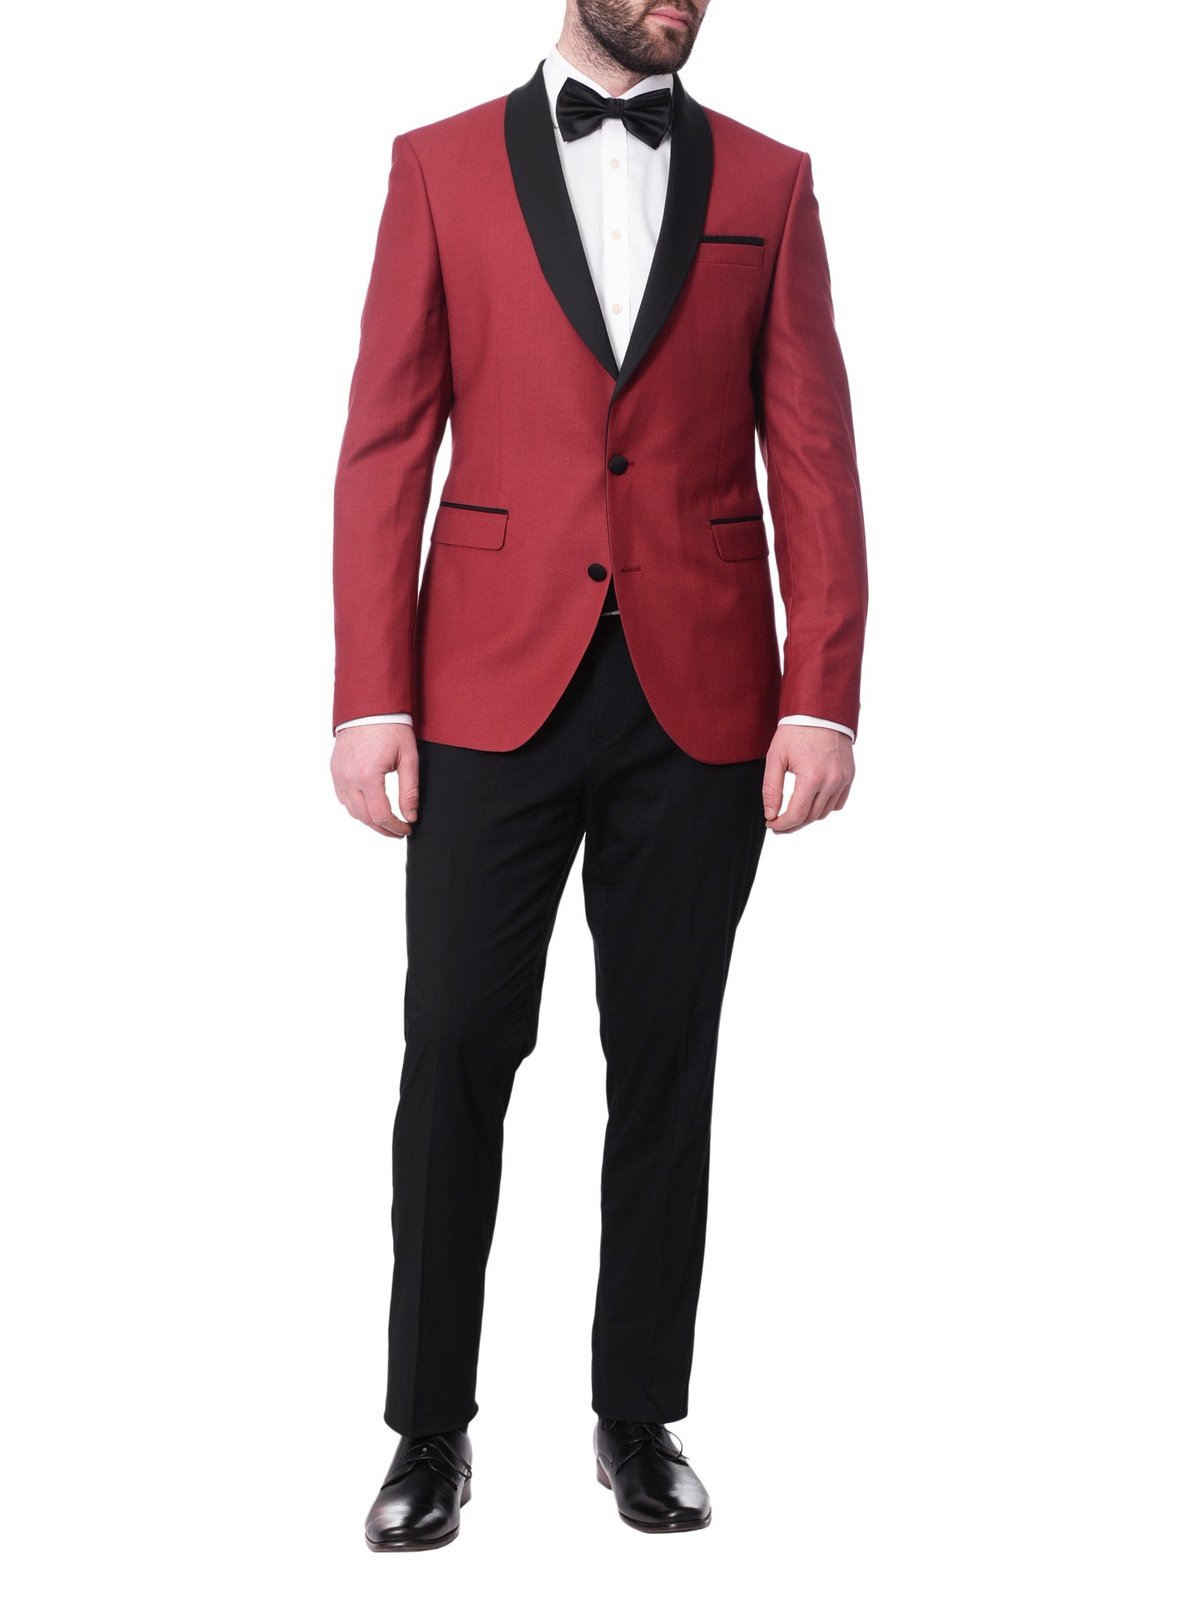 Cengizhan Baybars TWO PIECE SUITS Cengizhan Baybars Men&#39;s Solid Red Slim Fit Tuxedo Suit With Black Shawl Lapels